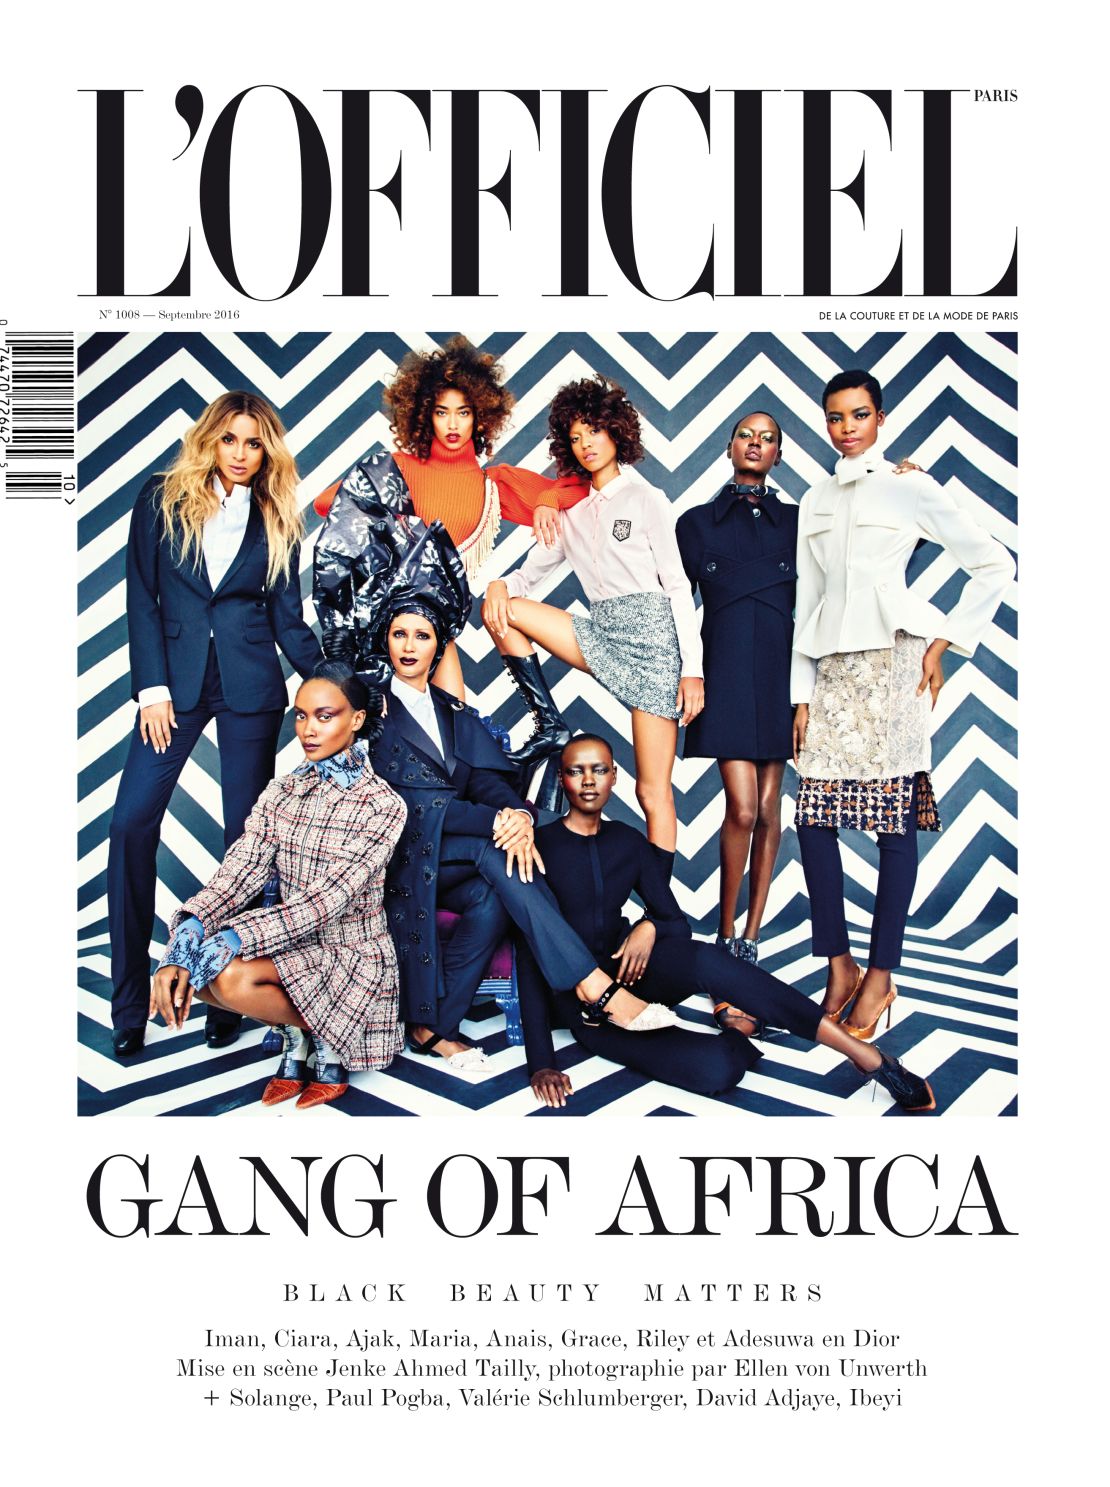 L'Officiel's "Gang of Africa" issue featuring Iman, Ajak Deng, Ciara, and Solange.